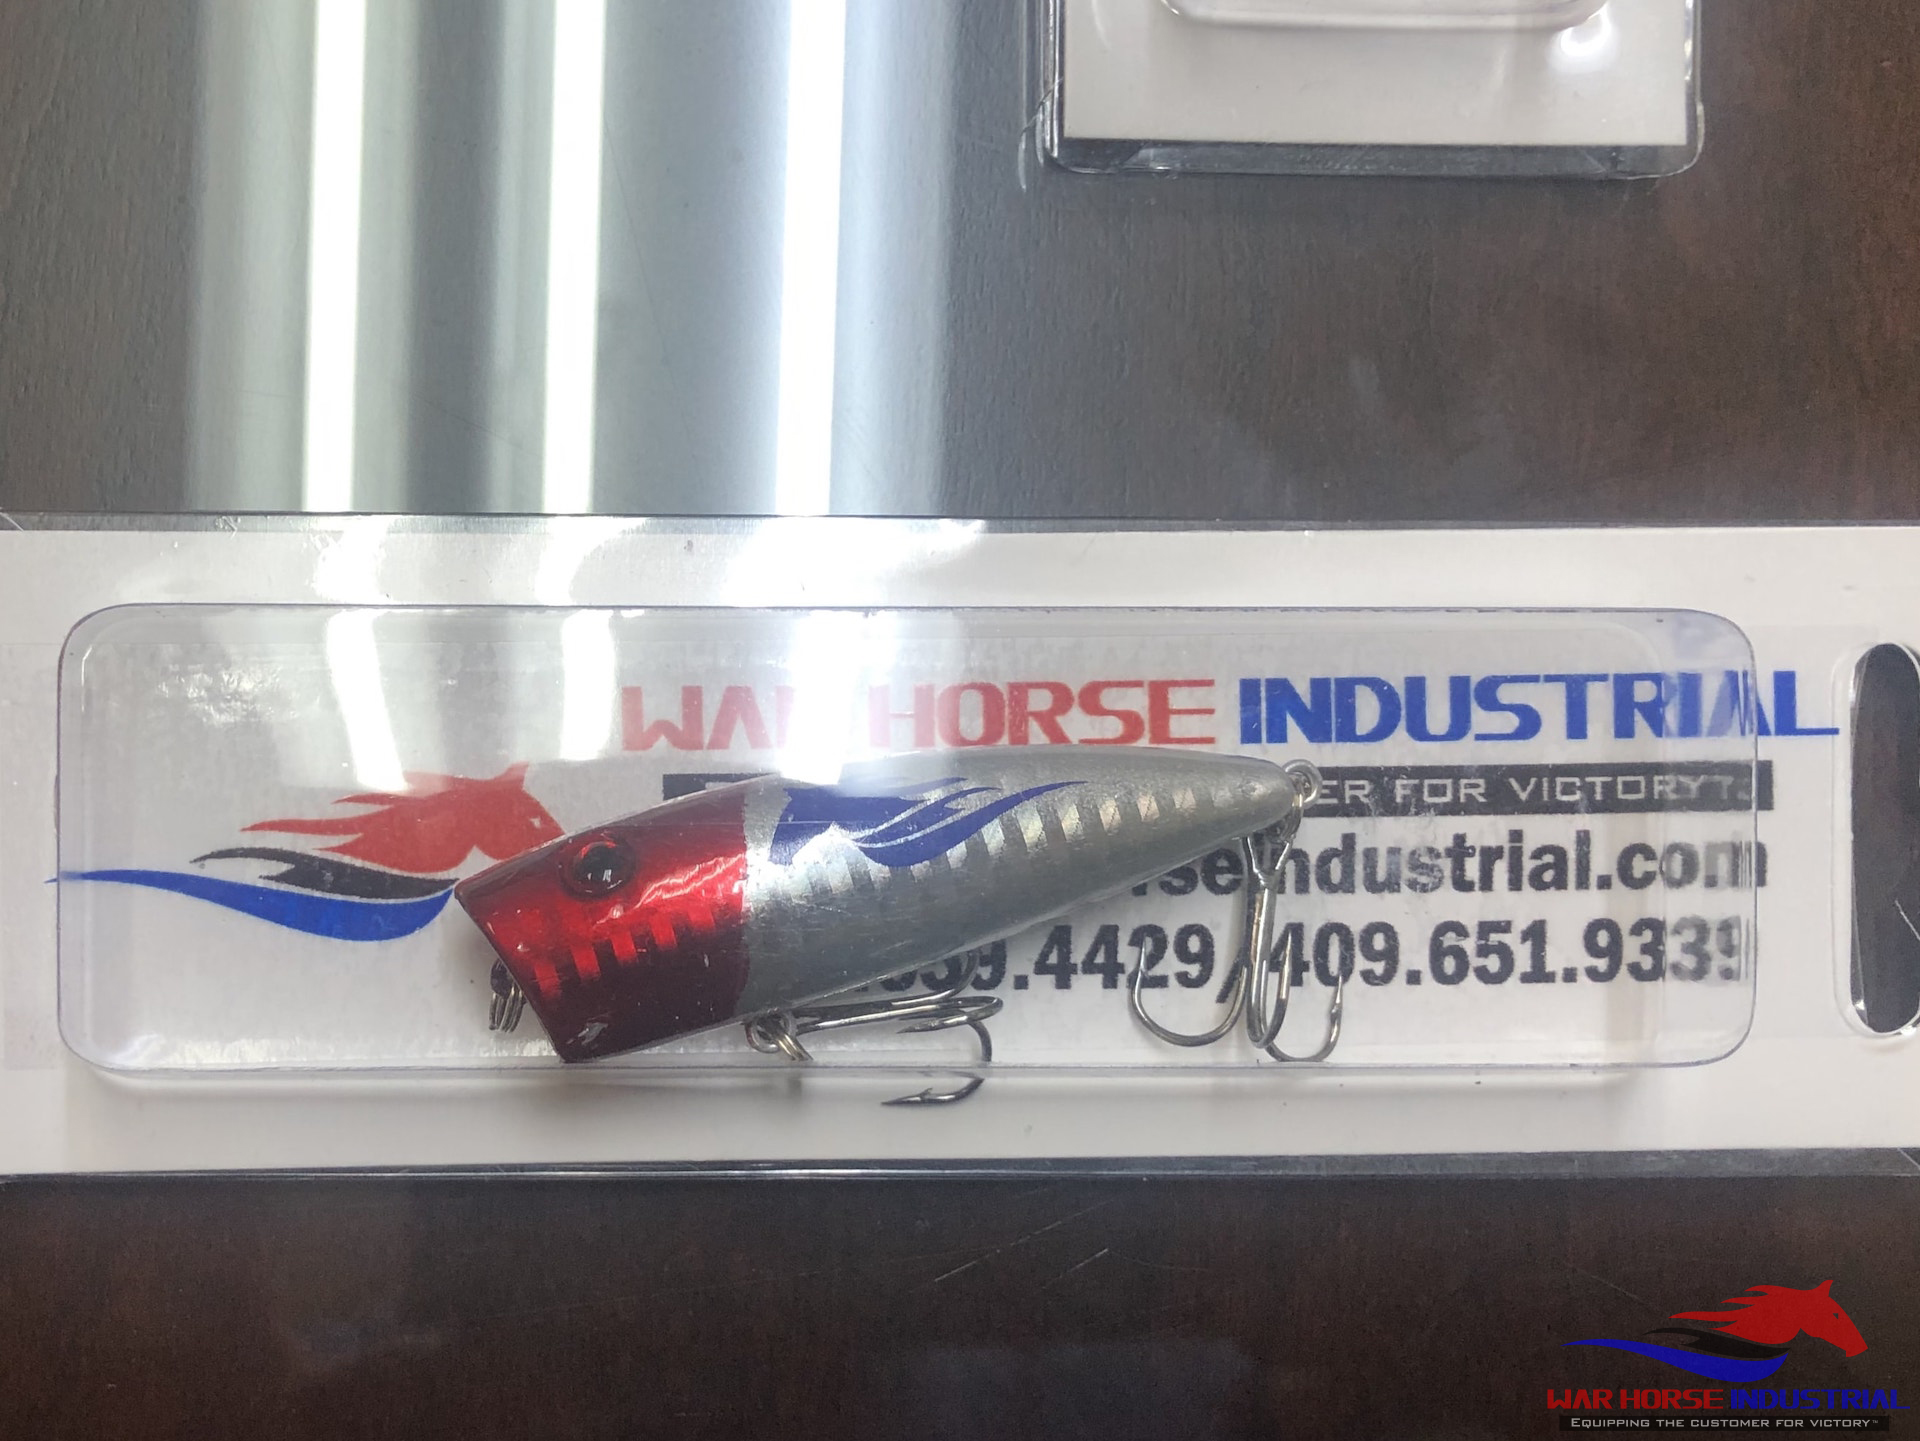 War Horse Industrial Product number 00172